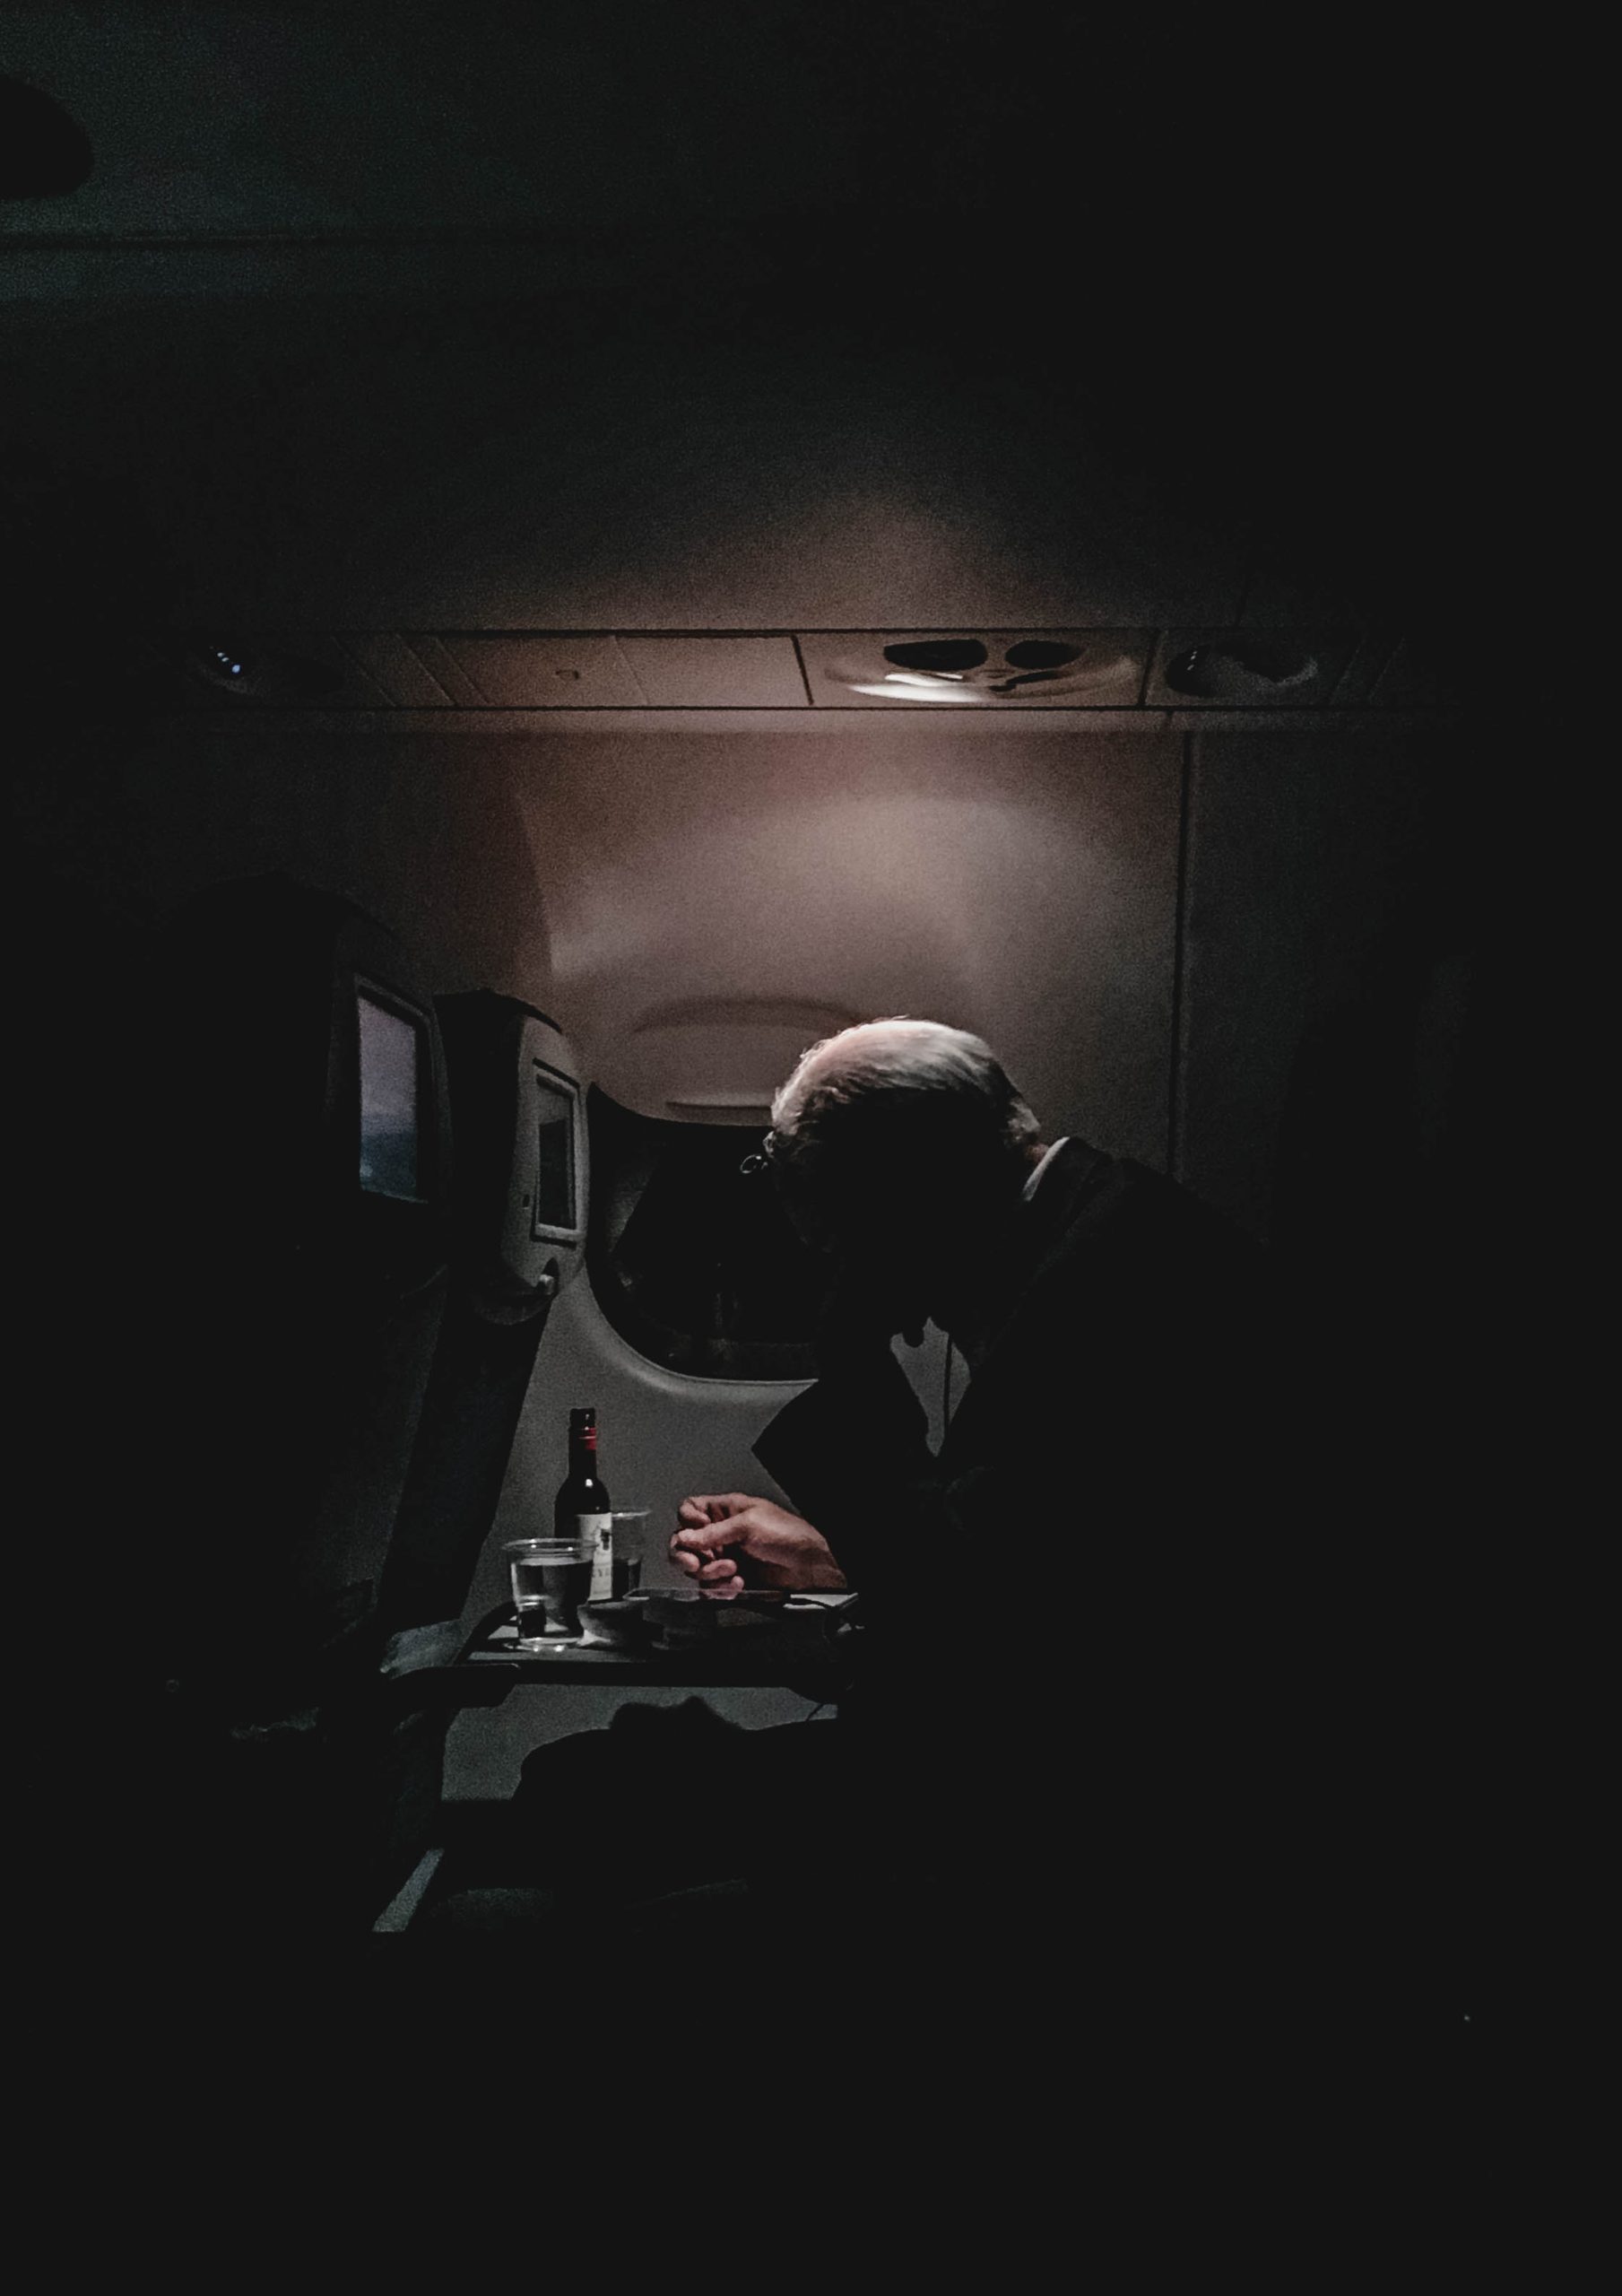 A man is on an airplane with alcohol on his tray table. He is looking down in anguish